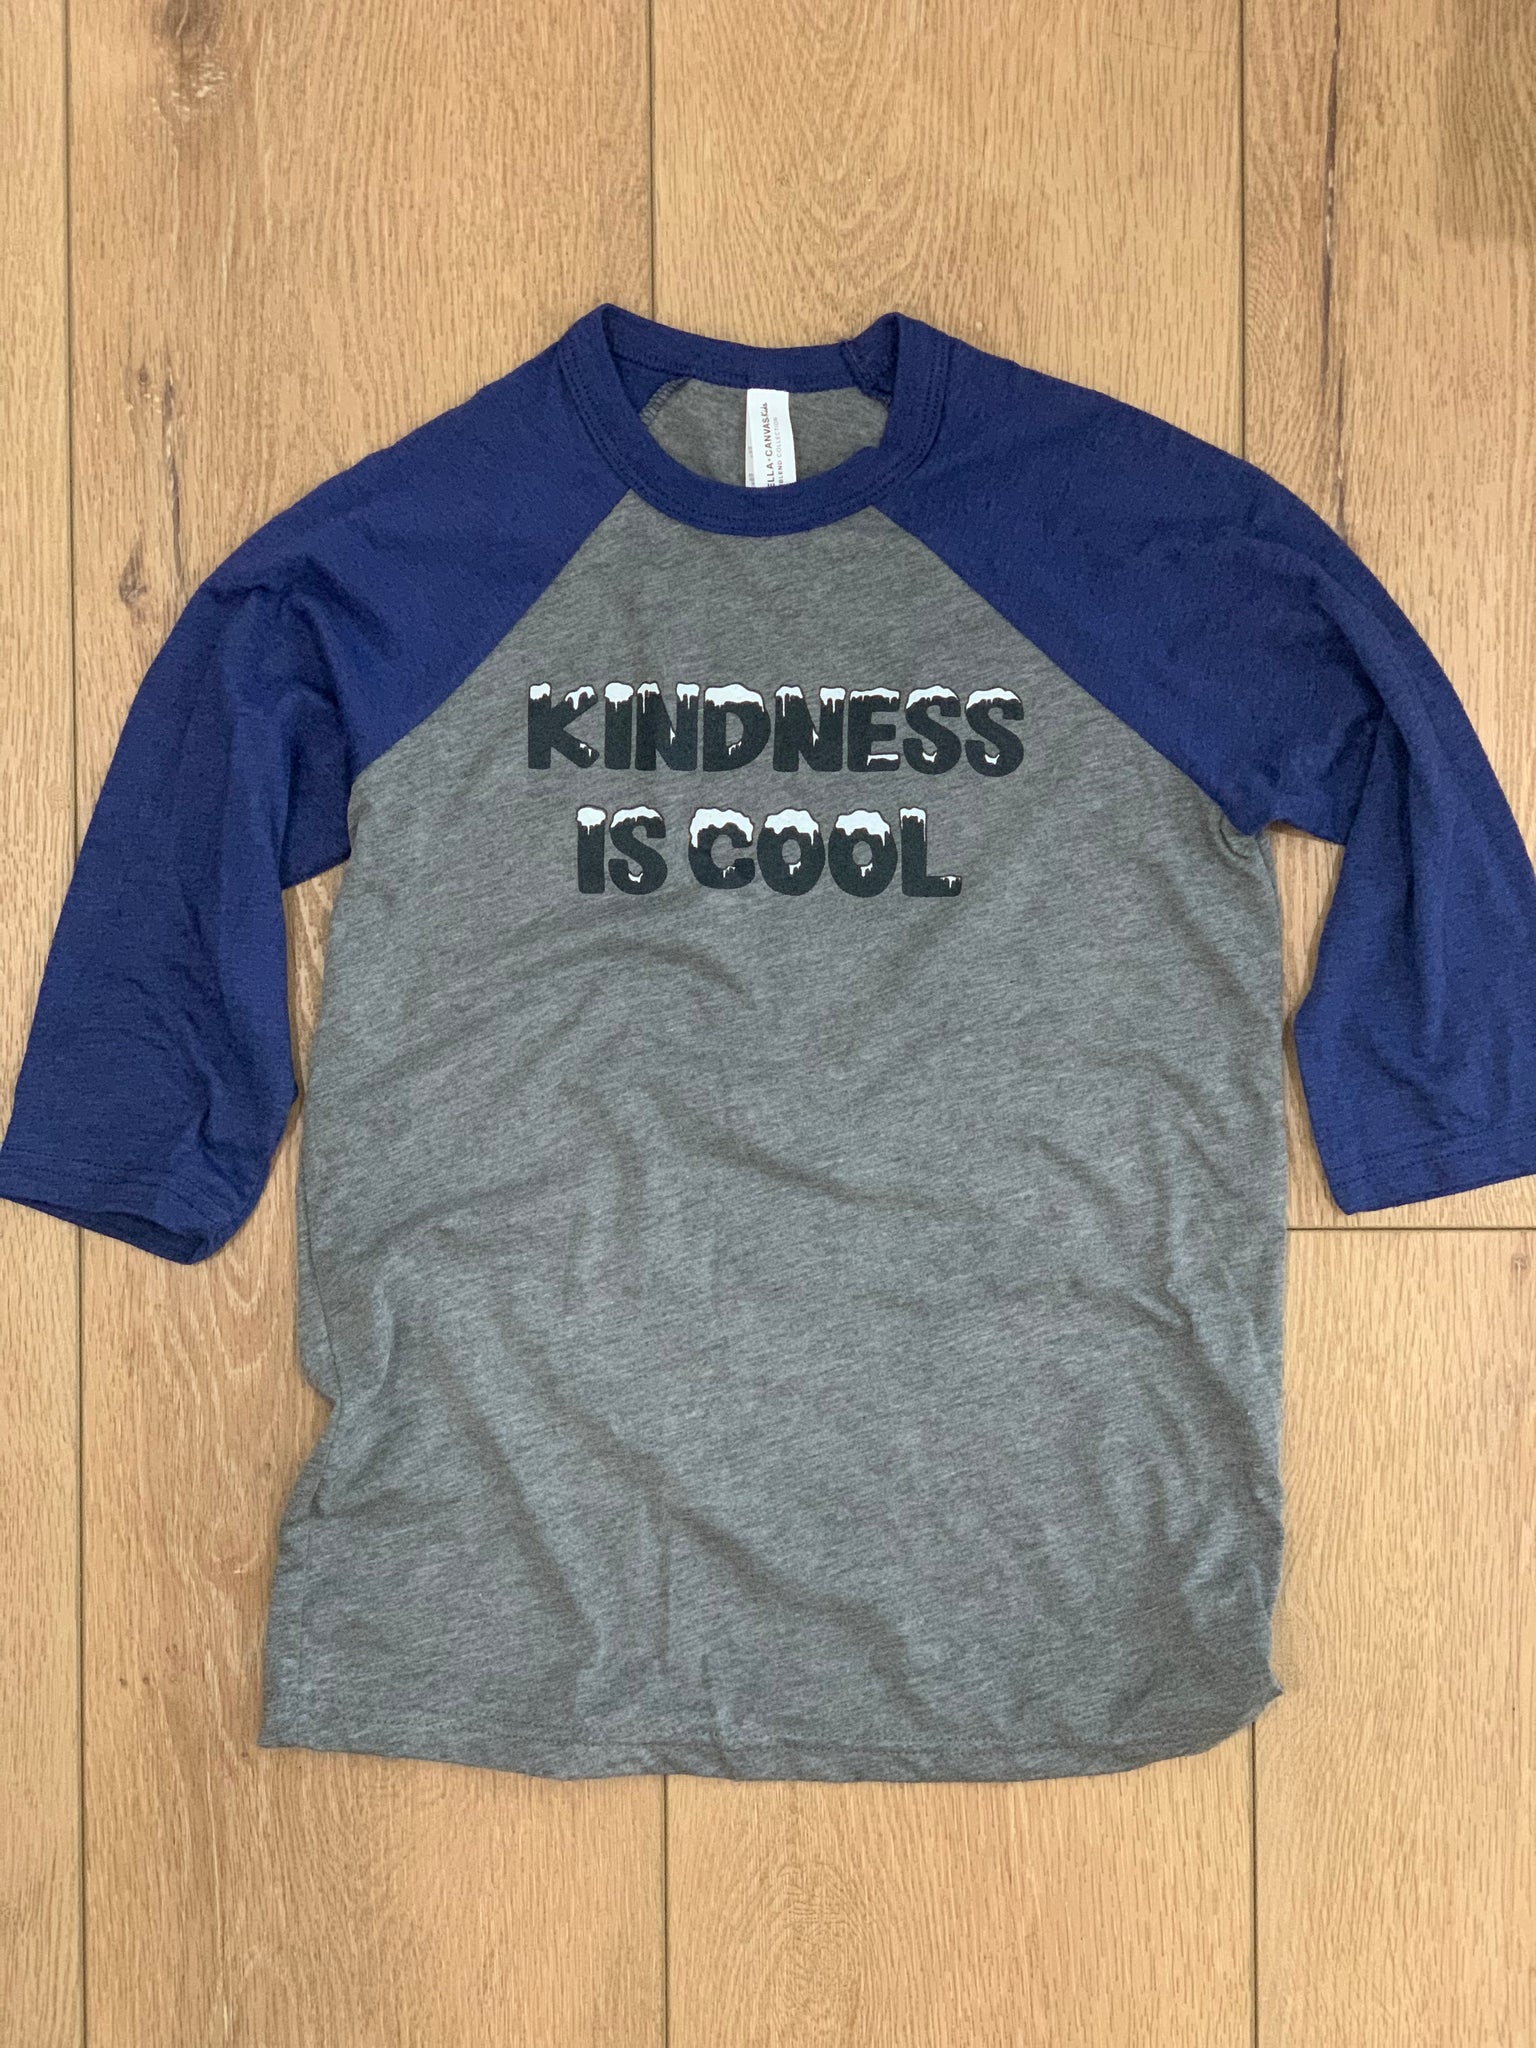 Kindness Is Cool youth tee loop